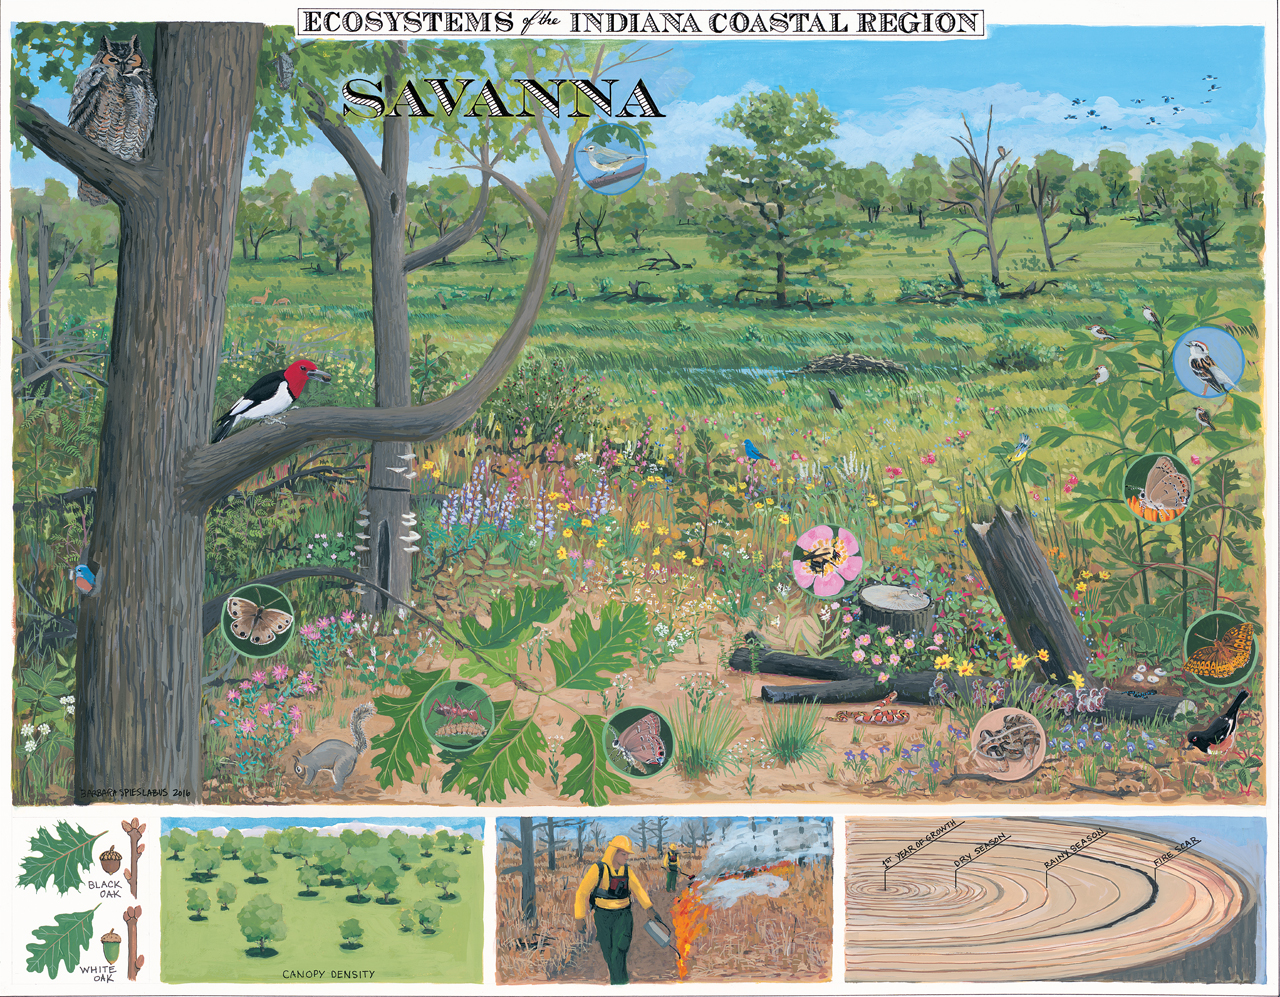 Images show trees, animals, and leaves, as well as people doing prescribed burns, with the word “Savanna” and “Ecosystems of the Indiana Coastal Region.”